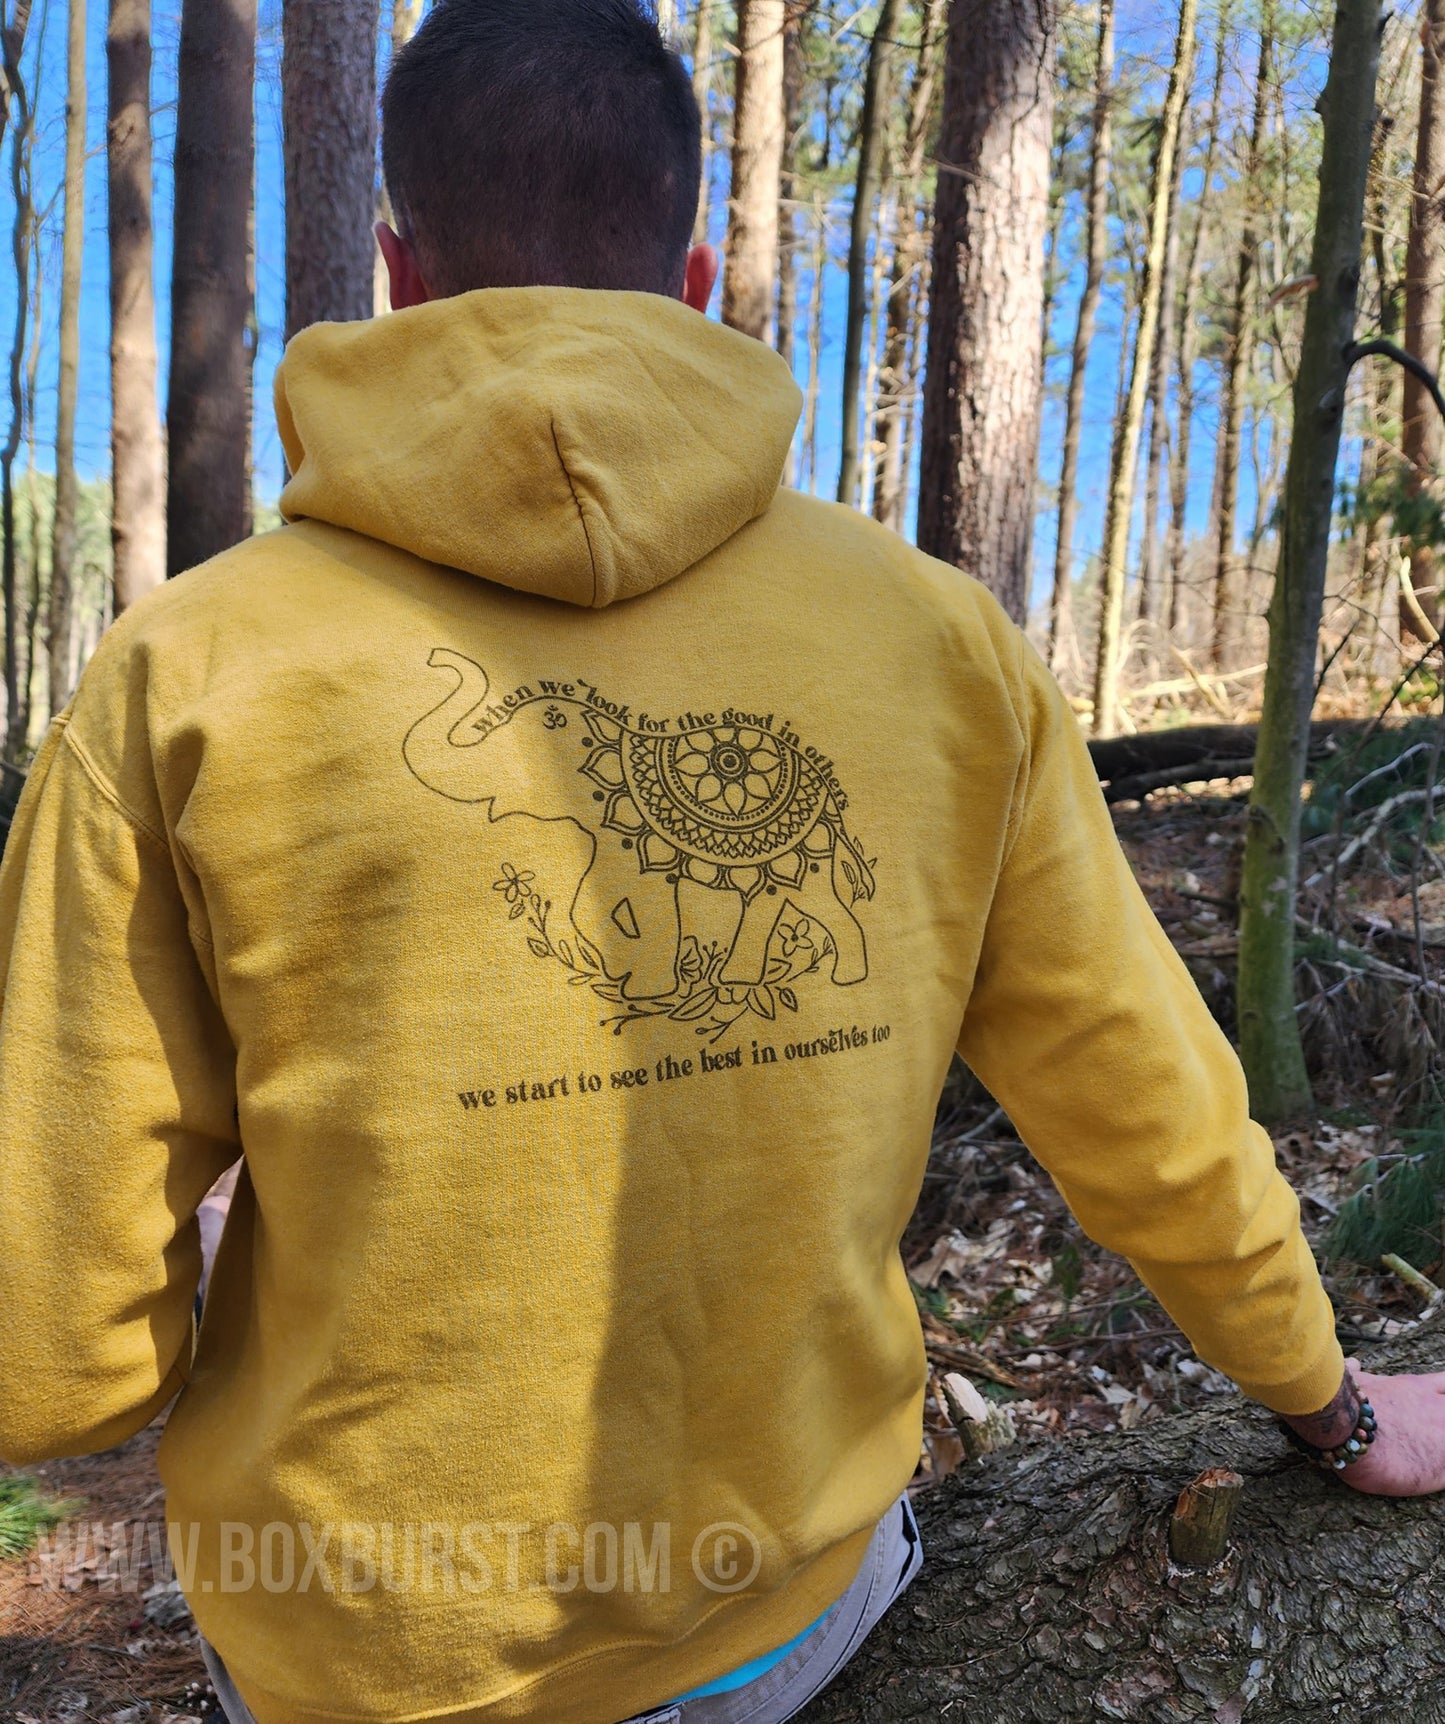 Om Elephant See the Good in Others unisex adult hoodie ink print